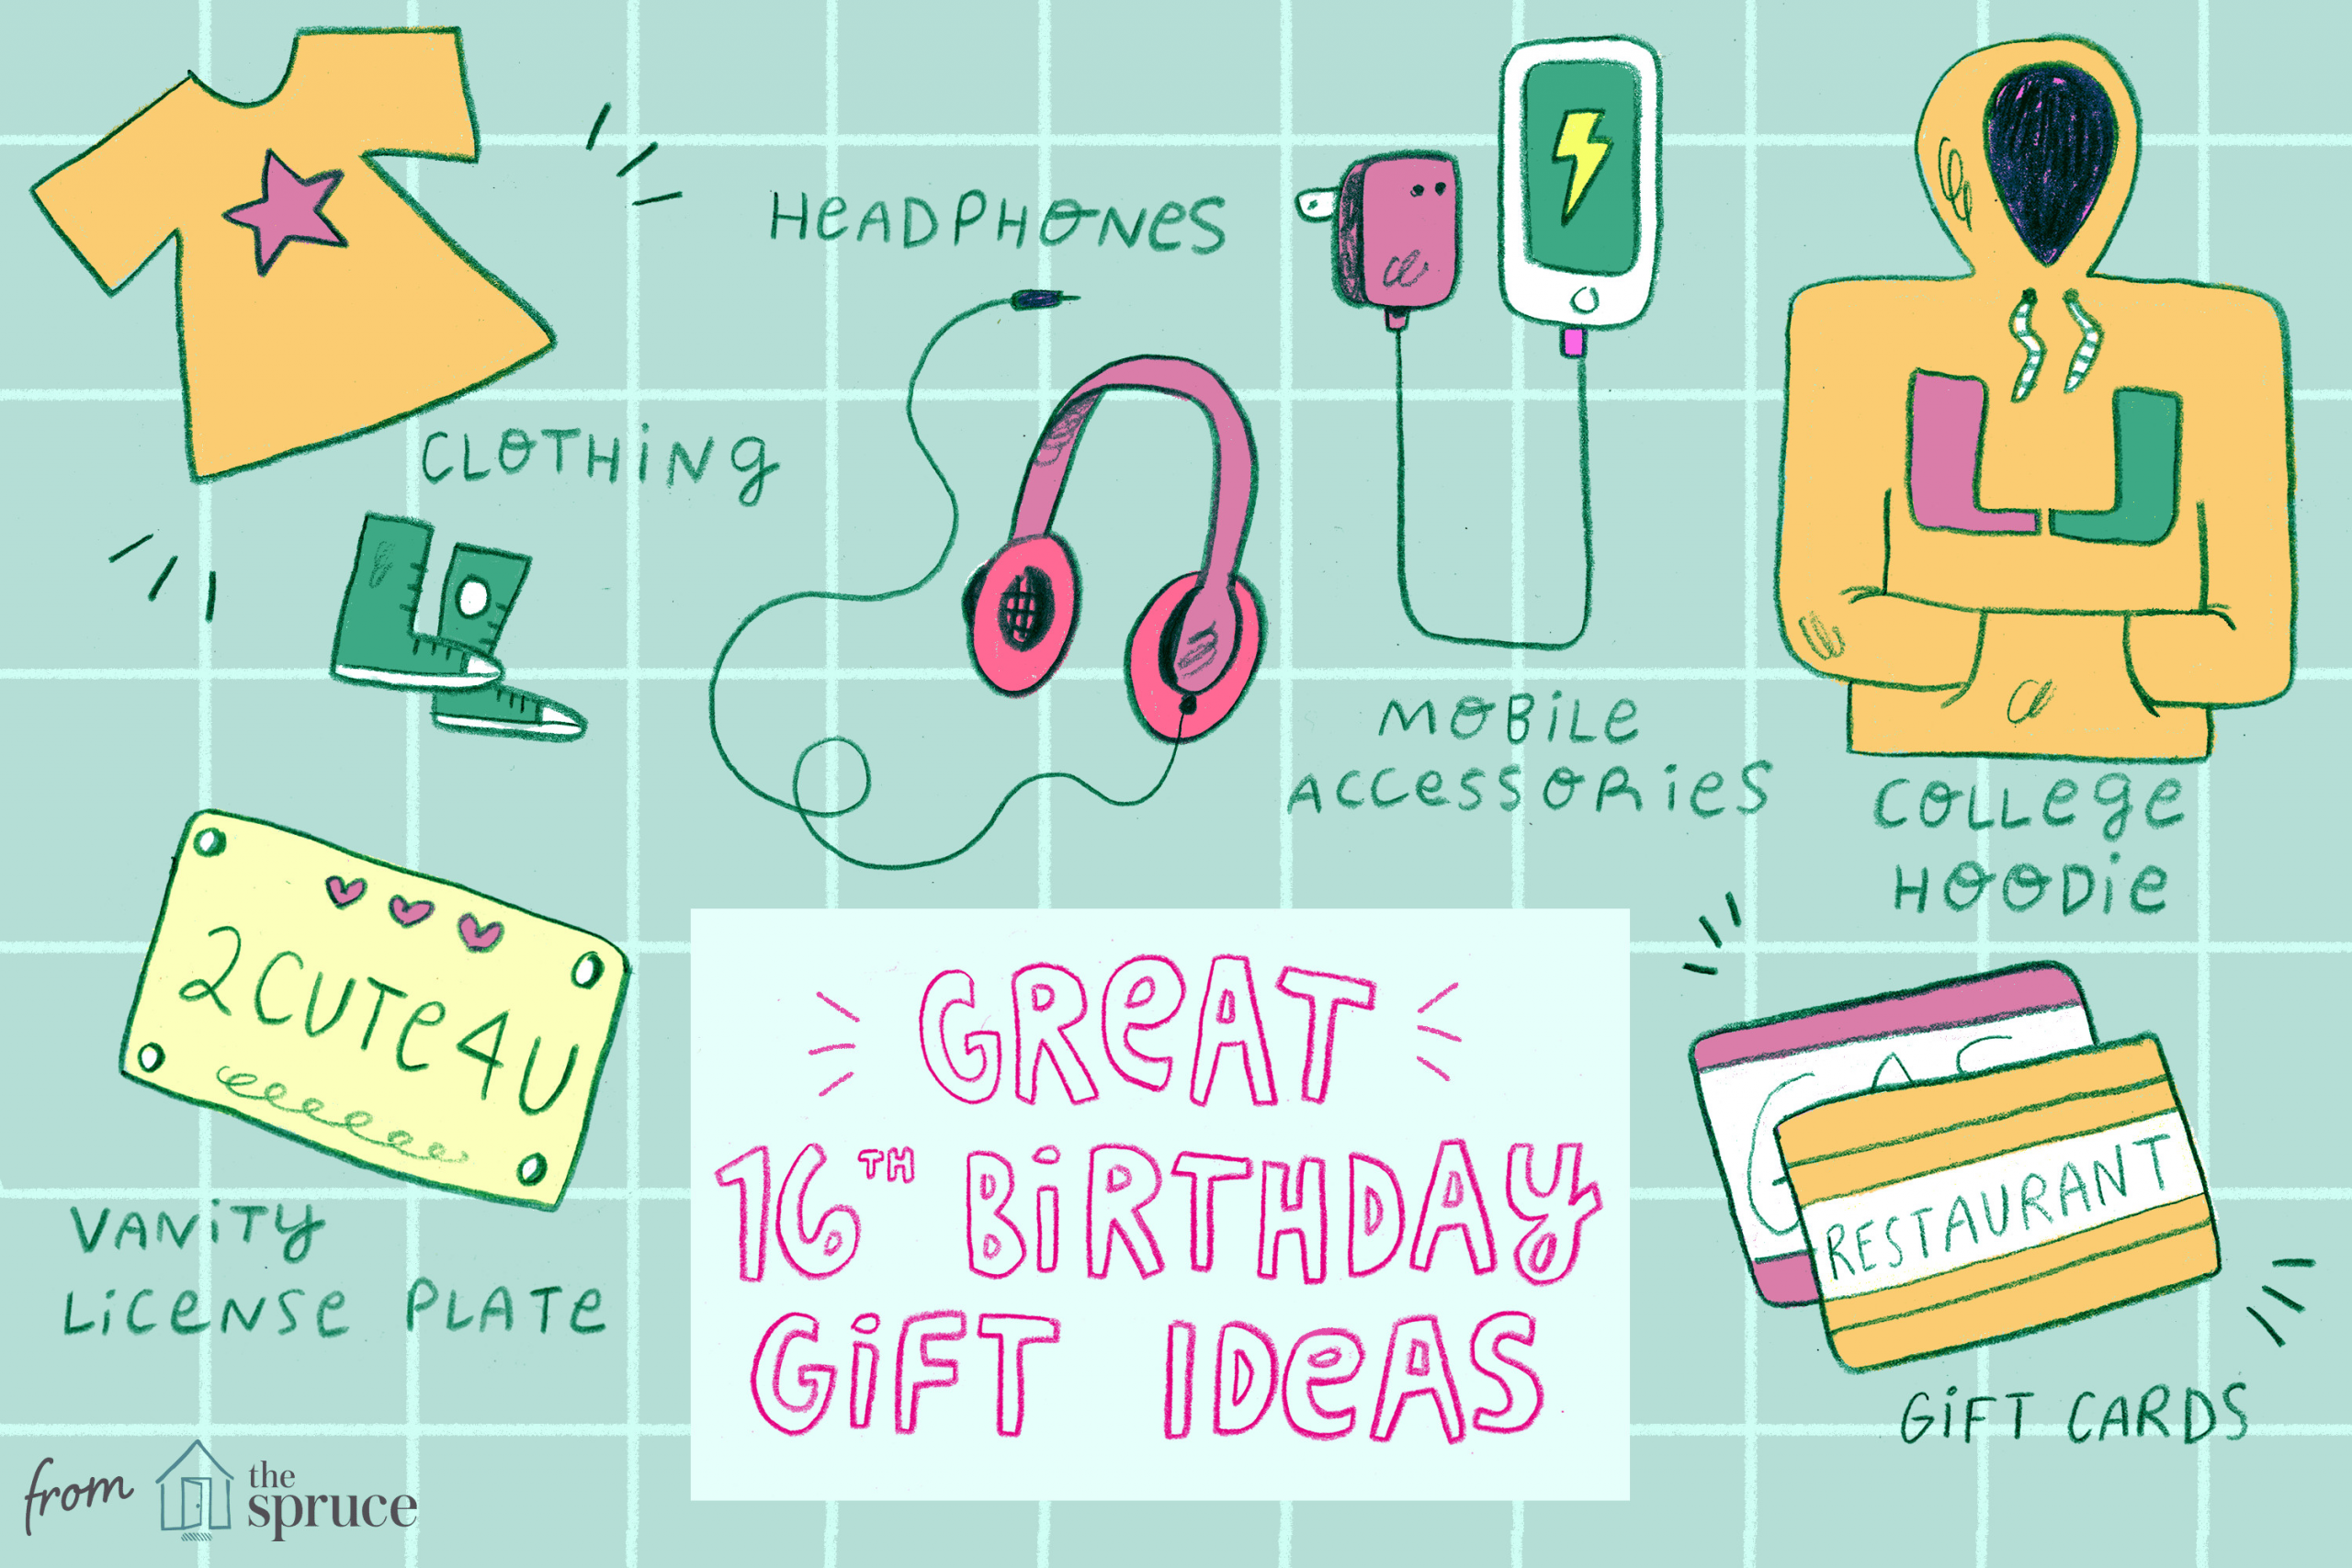 16Th Birthday Gift Ideas
 20 Awesome Ideas for 16th Birthday Gifts